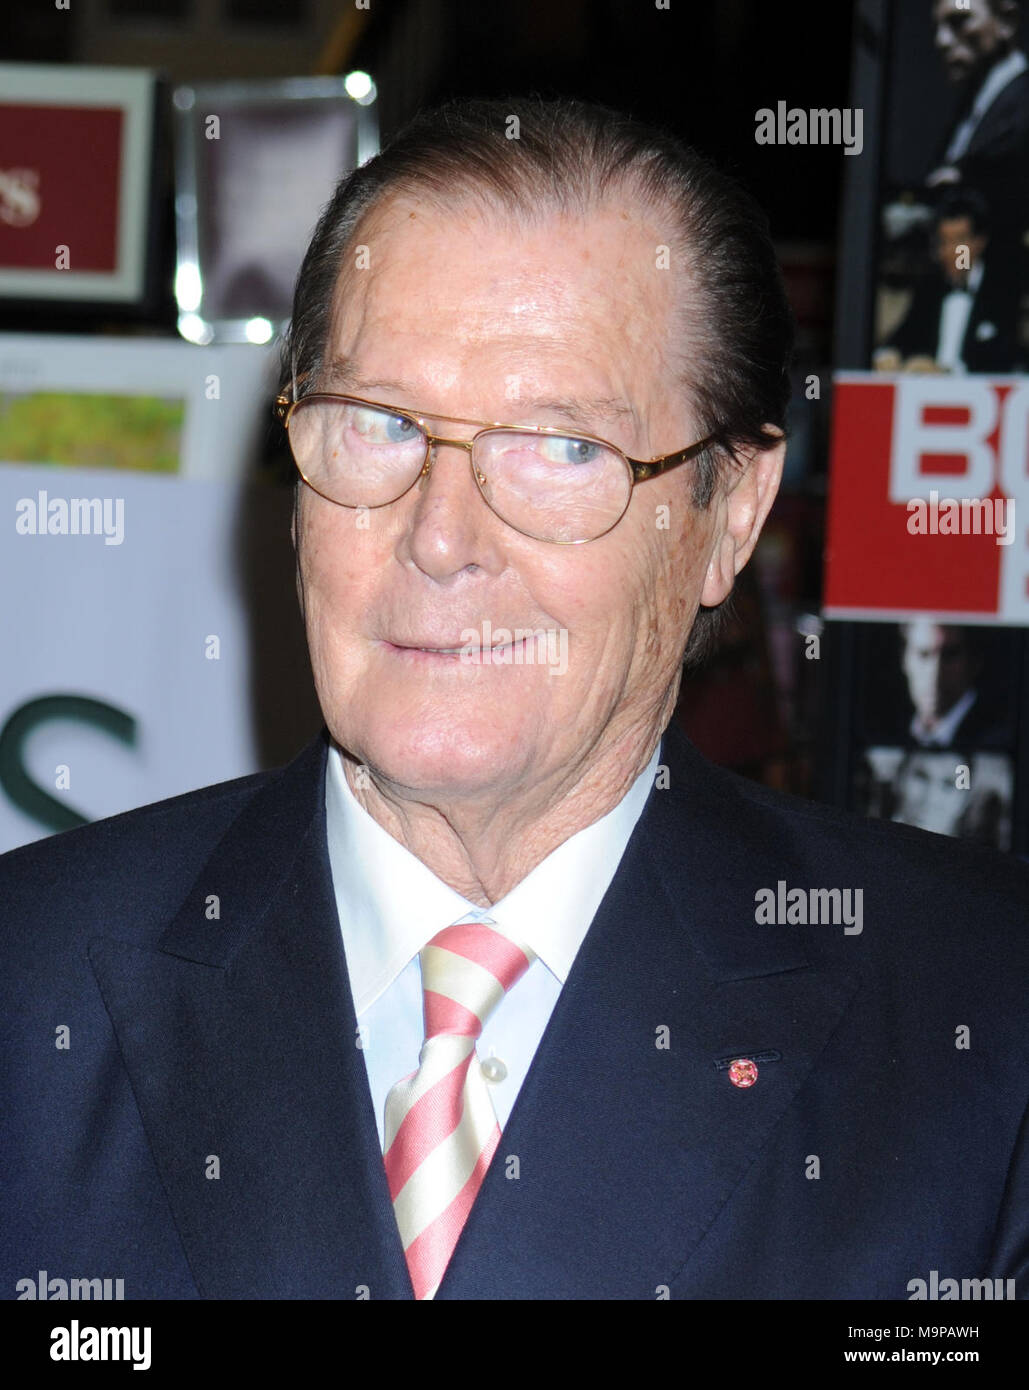 NEW YORK, NY - NOVEMBER 09:  Sir Roger Moore meets fans and signs copies of his book 'Bond on Bond' on November 9, 2012 in New York City.   People:  Sir Roger Moore Stock Photo